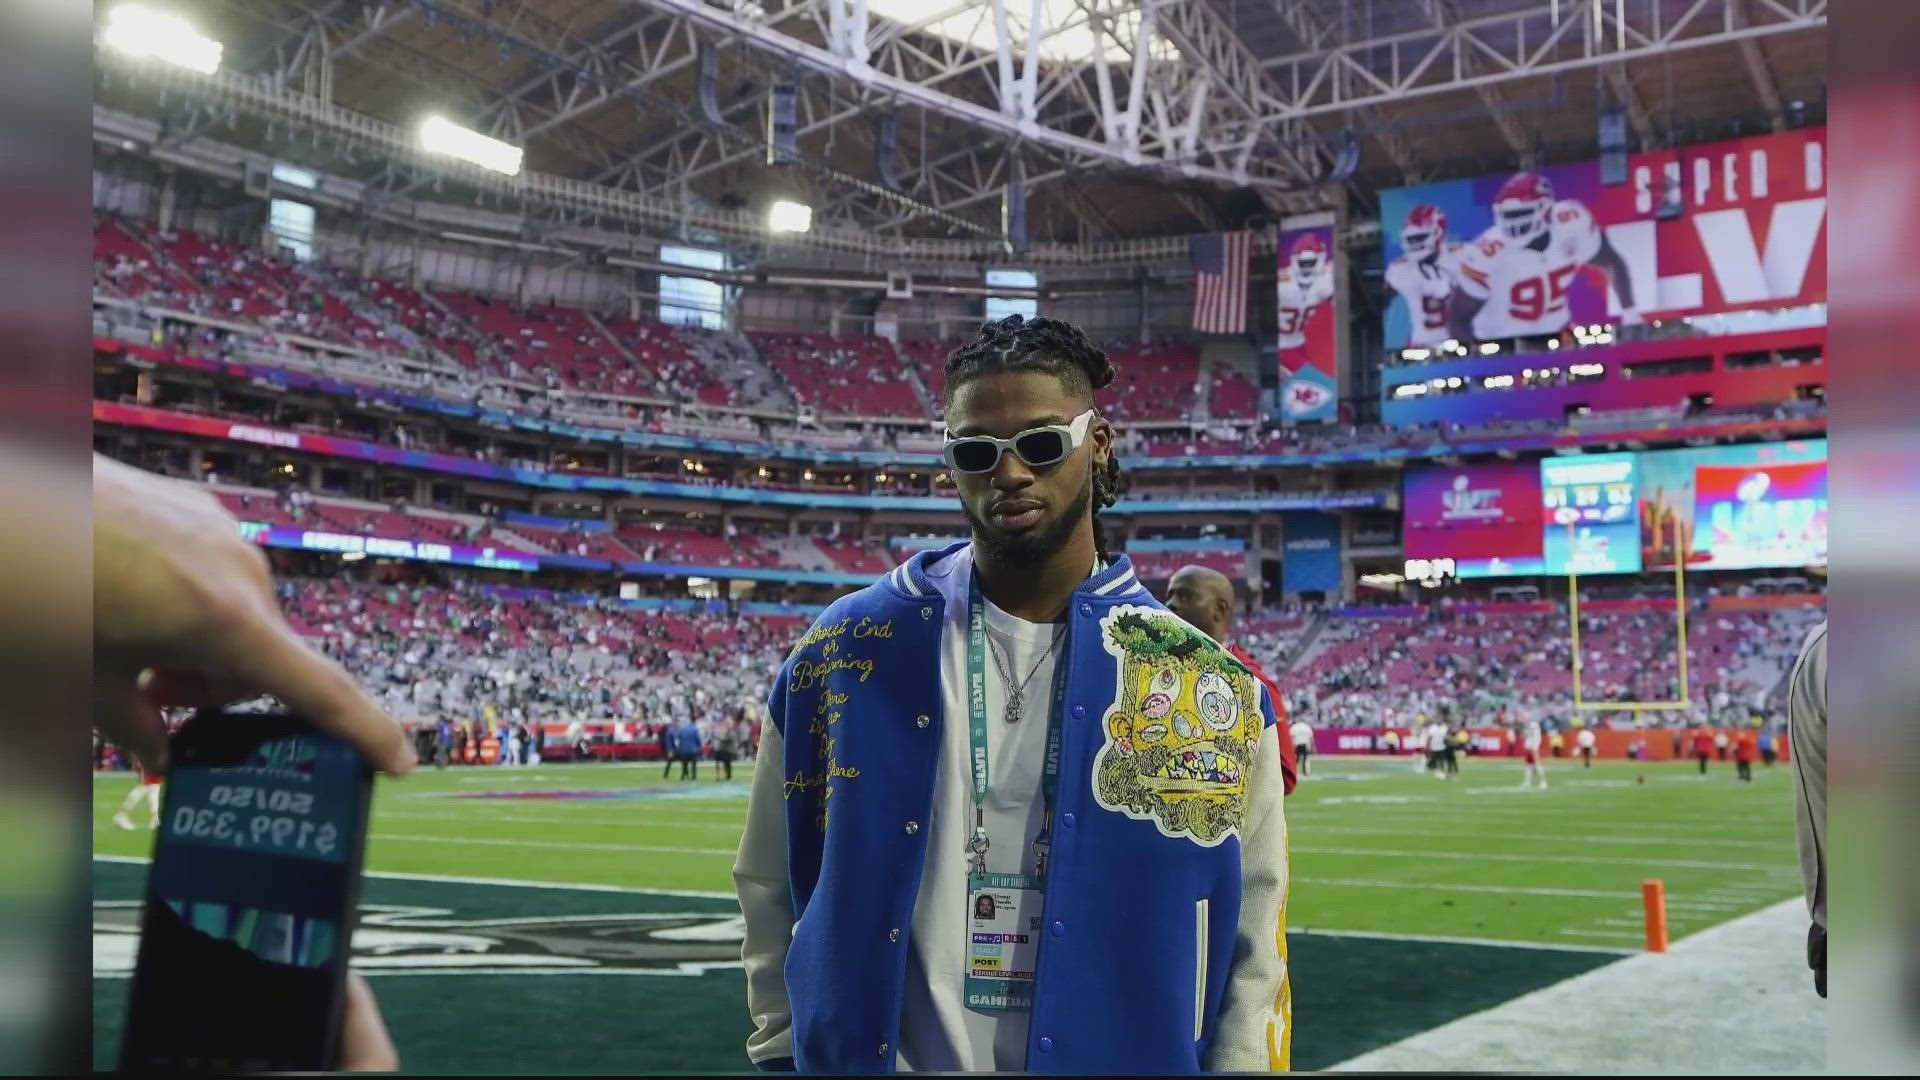 Buffalo Bills Damar Hamlin appeared on the field at the Super Bowl to help honor the medical personnel that helped save his life after he suffered cardiac arrest.